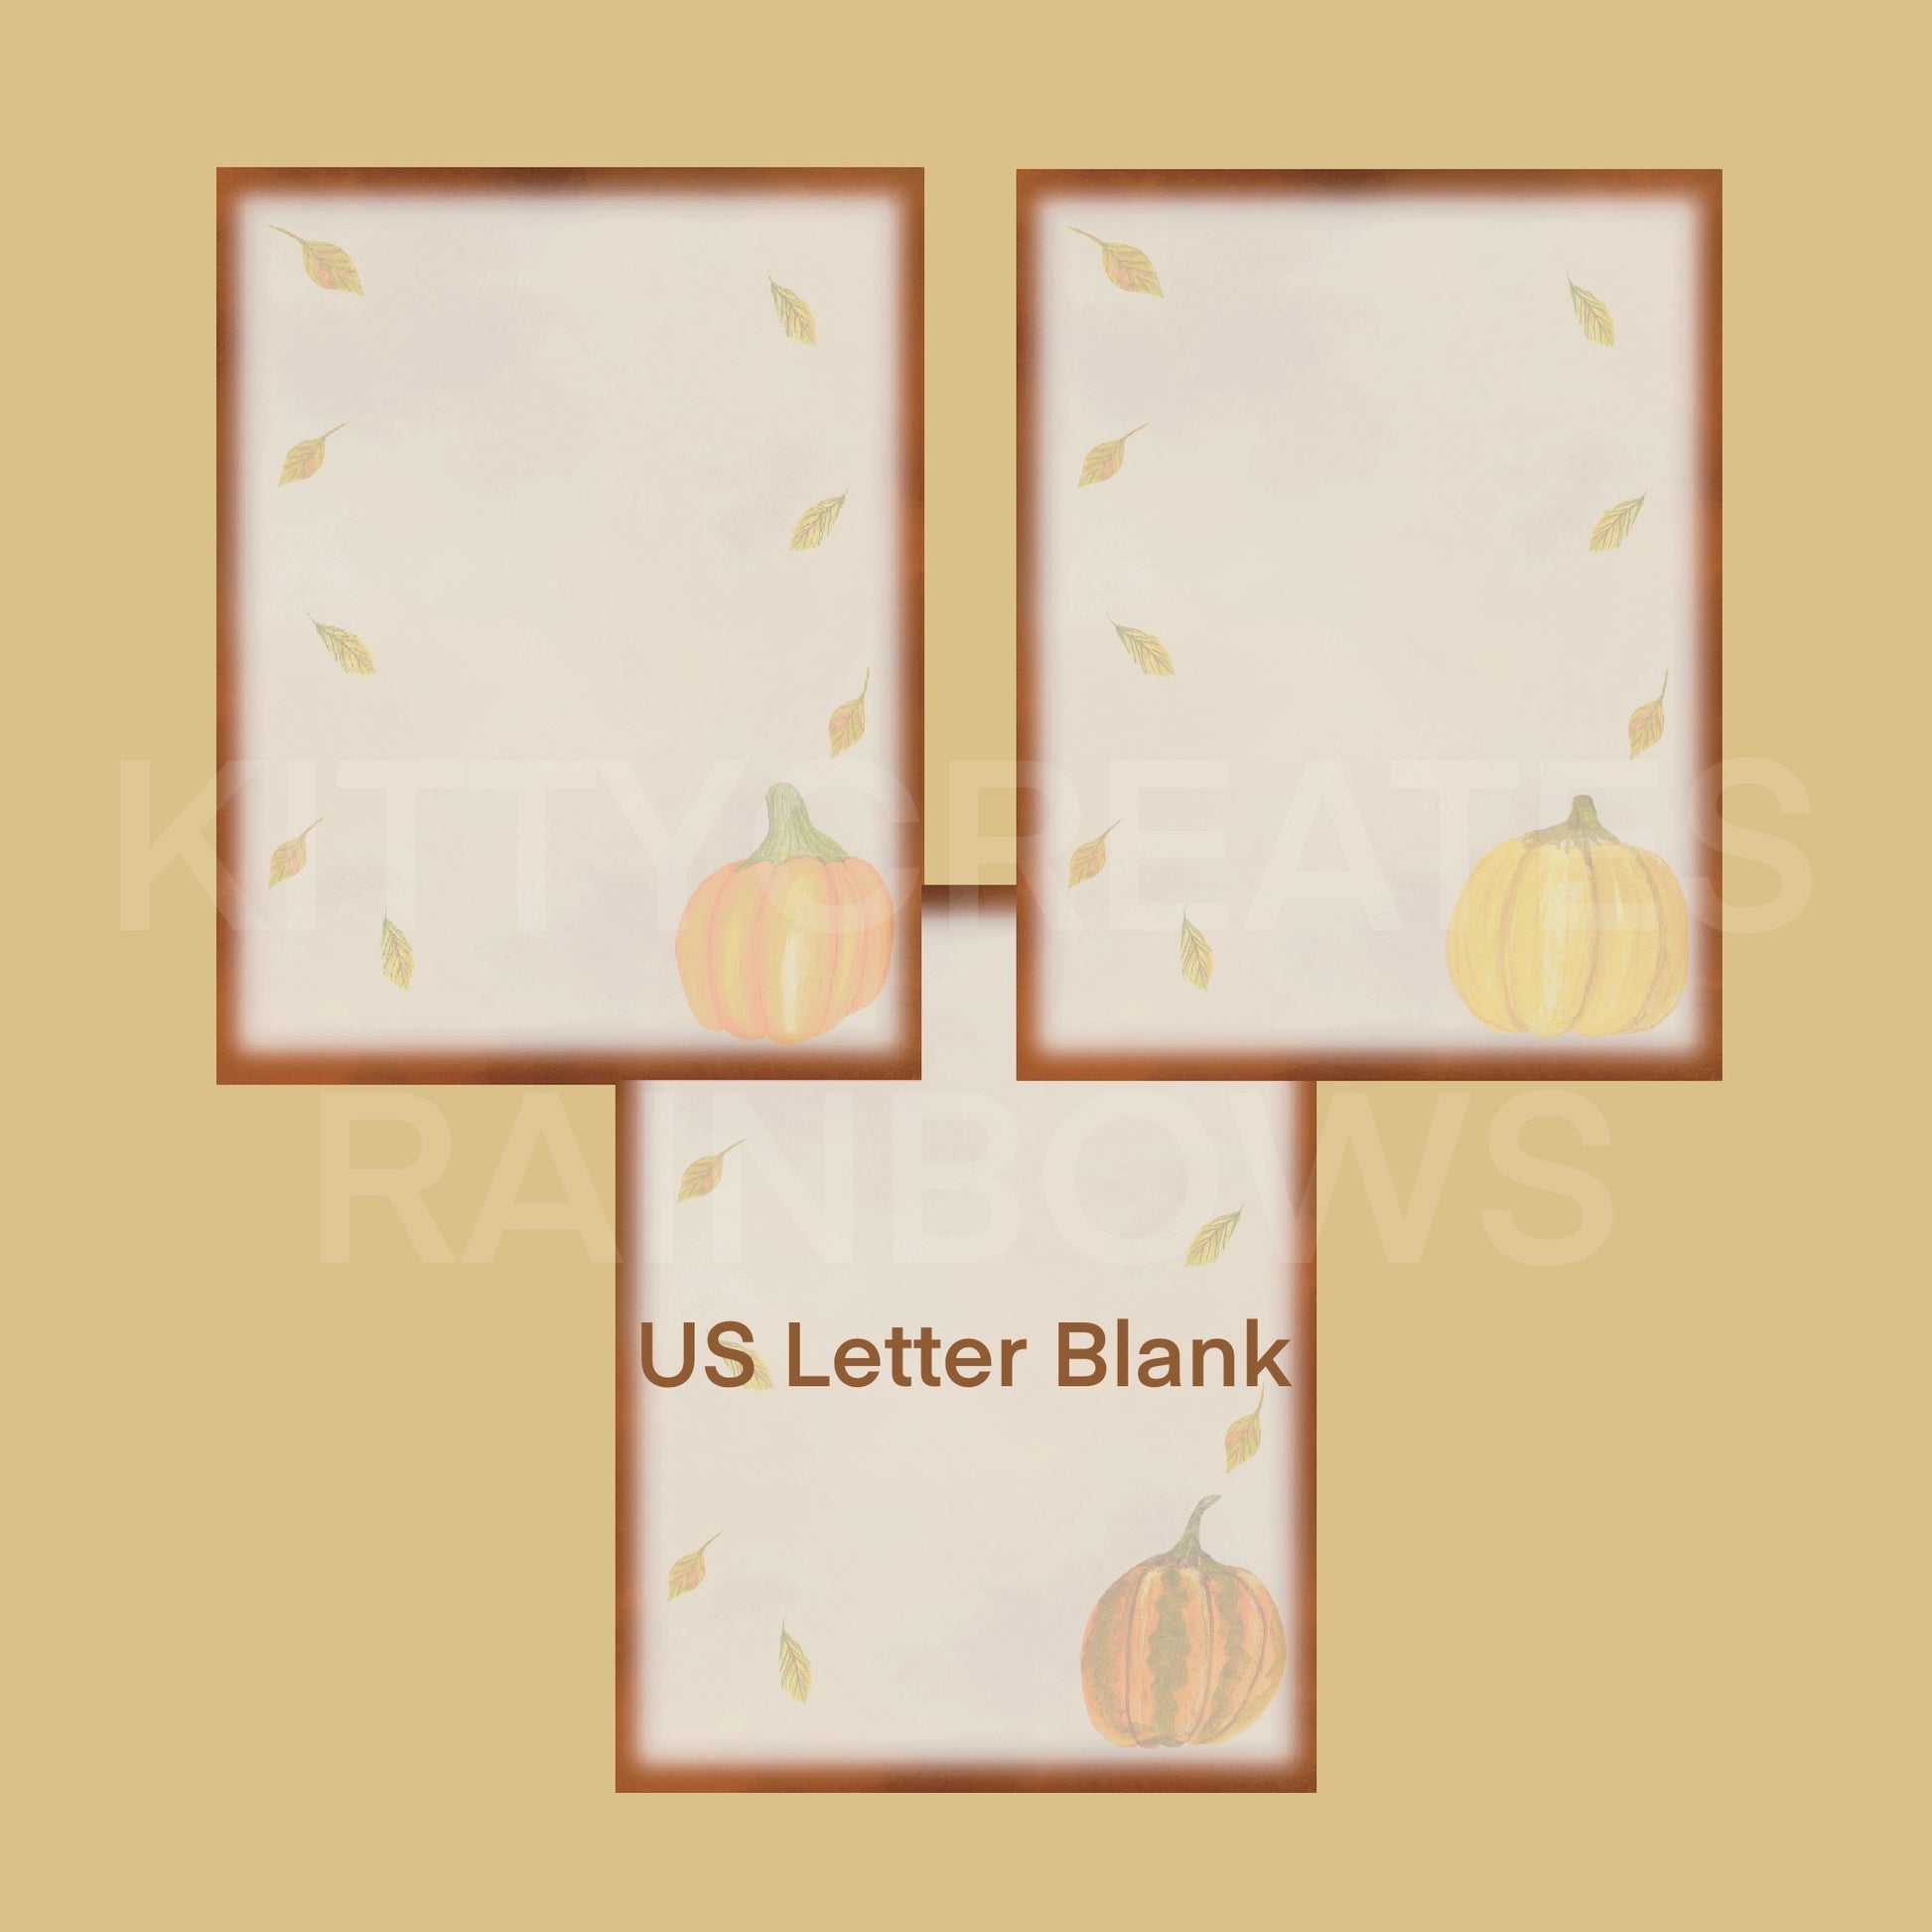 3 images of Fall Forage Pumpkin Writing Papers on a light brown yellow background and a white watermark saying Kitty Creates Rainbows. Text on bottom of image also says in brown text US Letter Blank